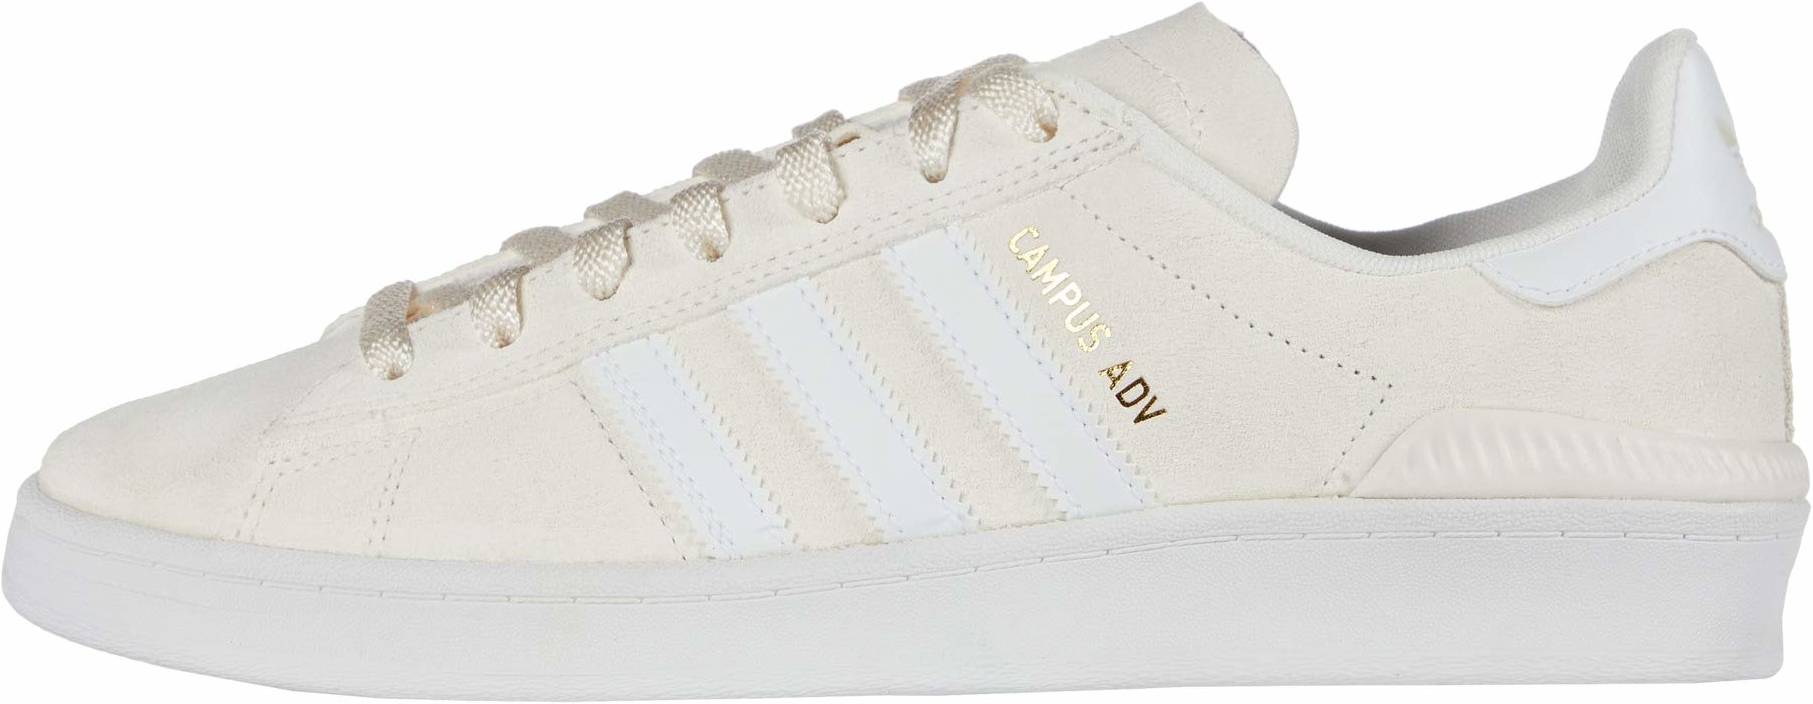 Adidas Campus ADV sneakers in 8 colors (only $64) | RunRepeat